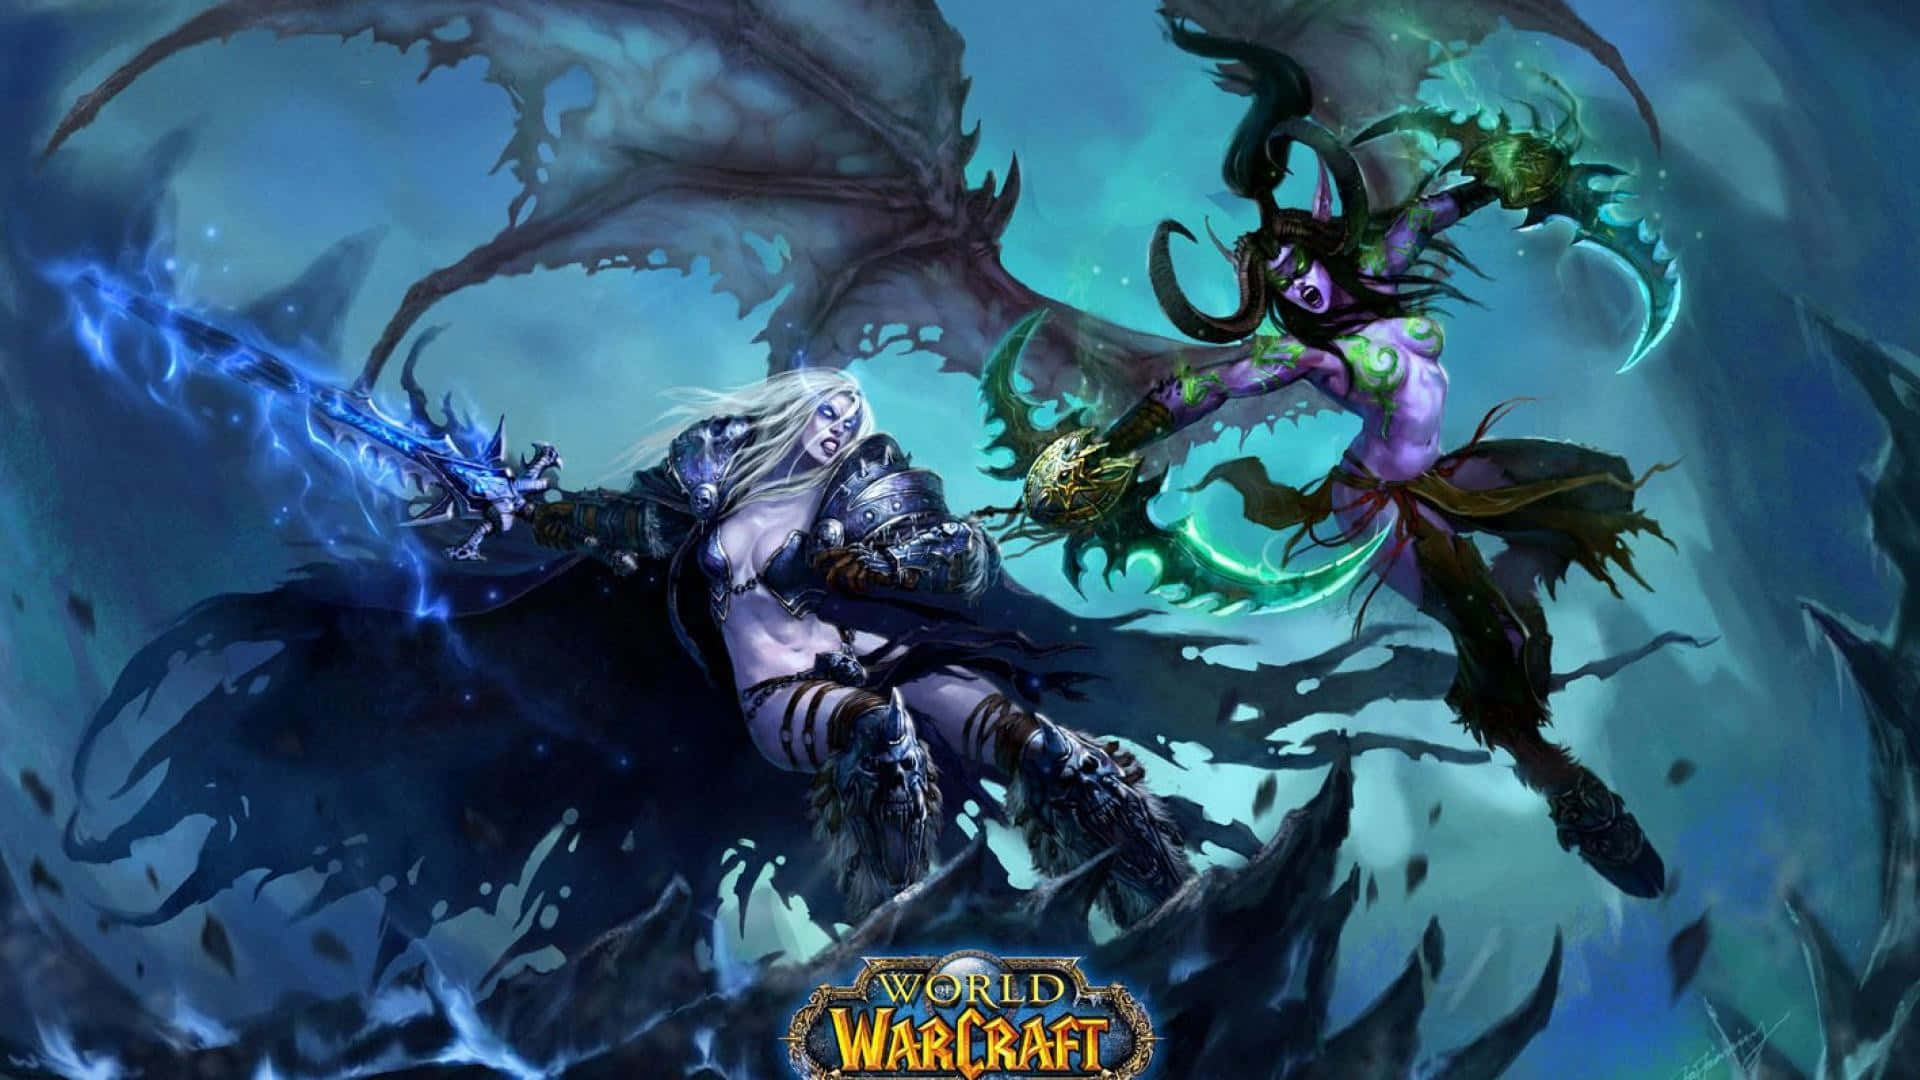 "Explore the World Of Warcraft in High Quality" Wallpaper